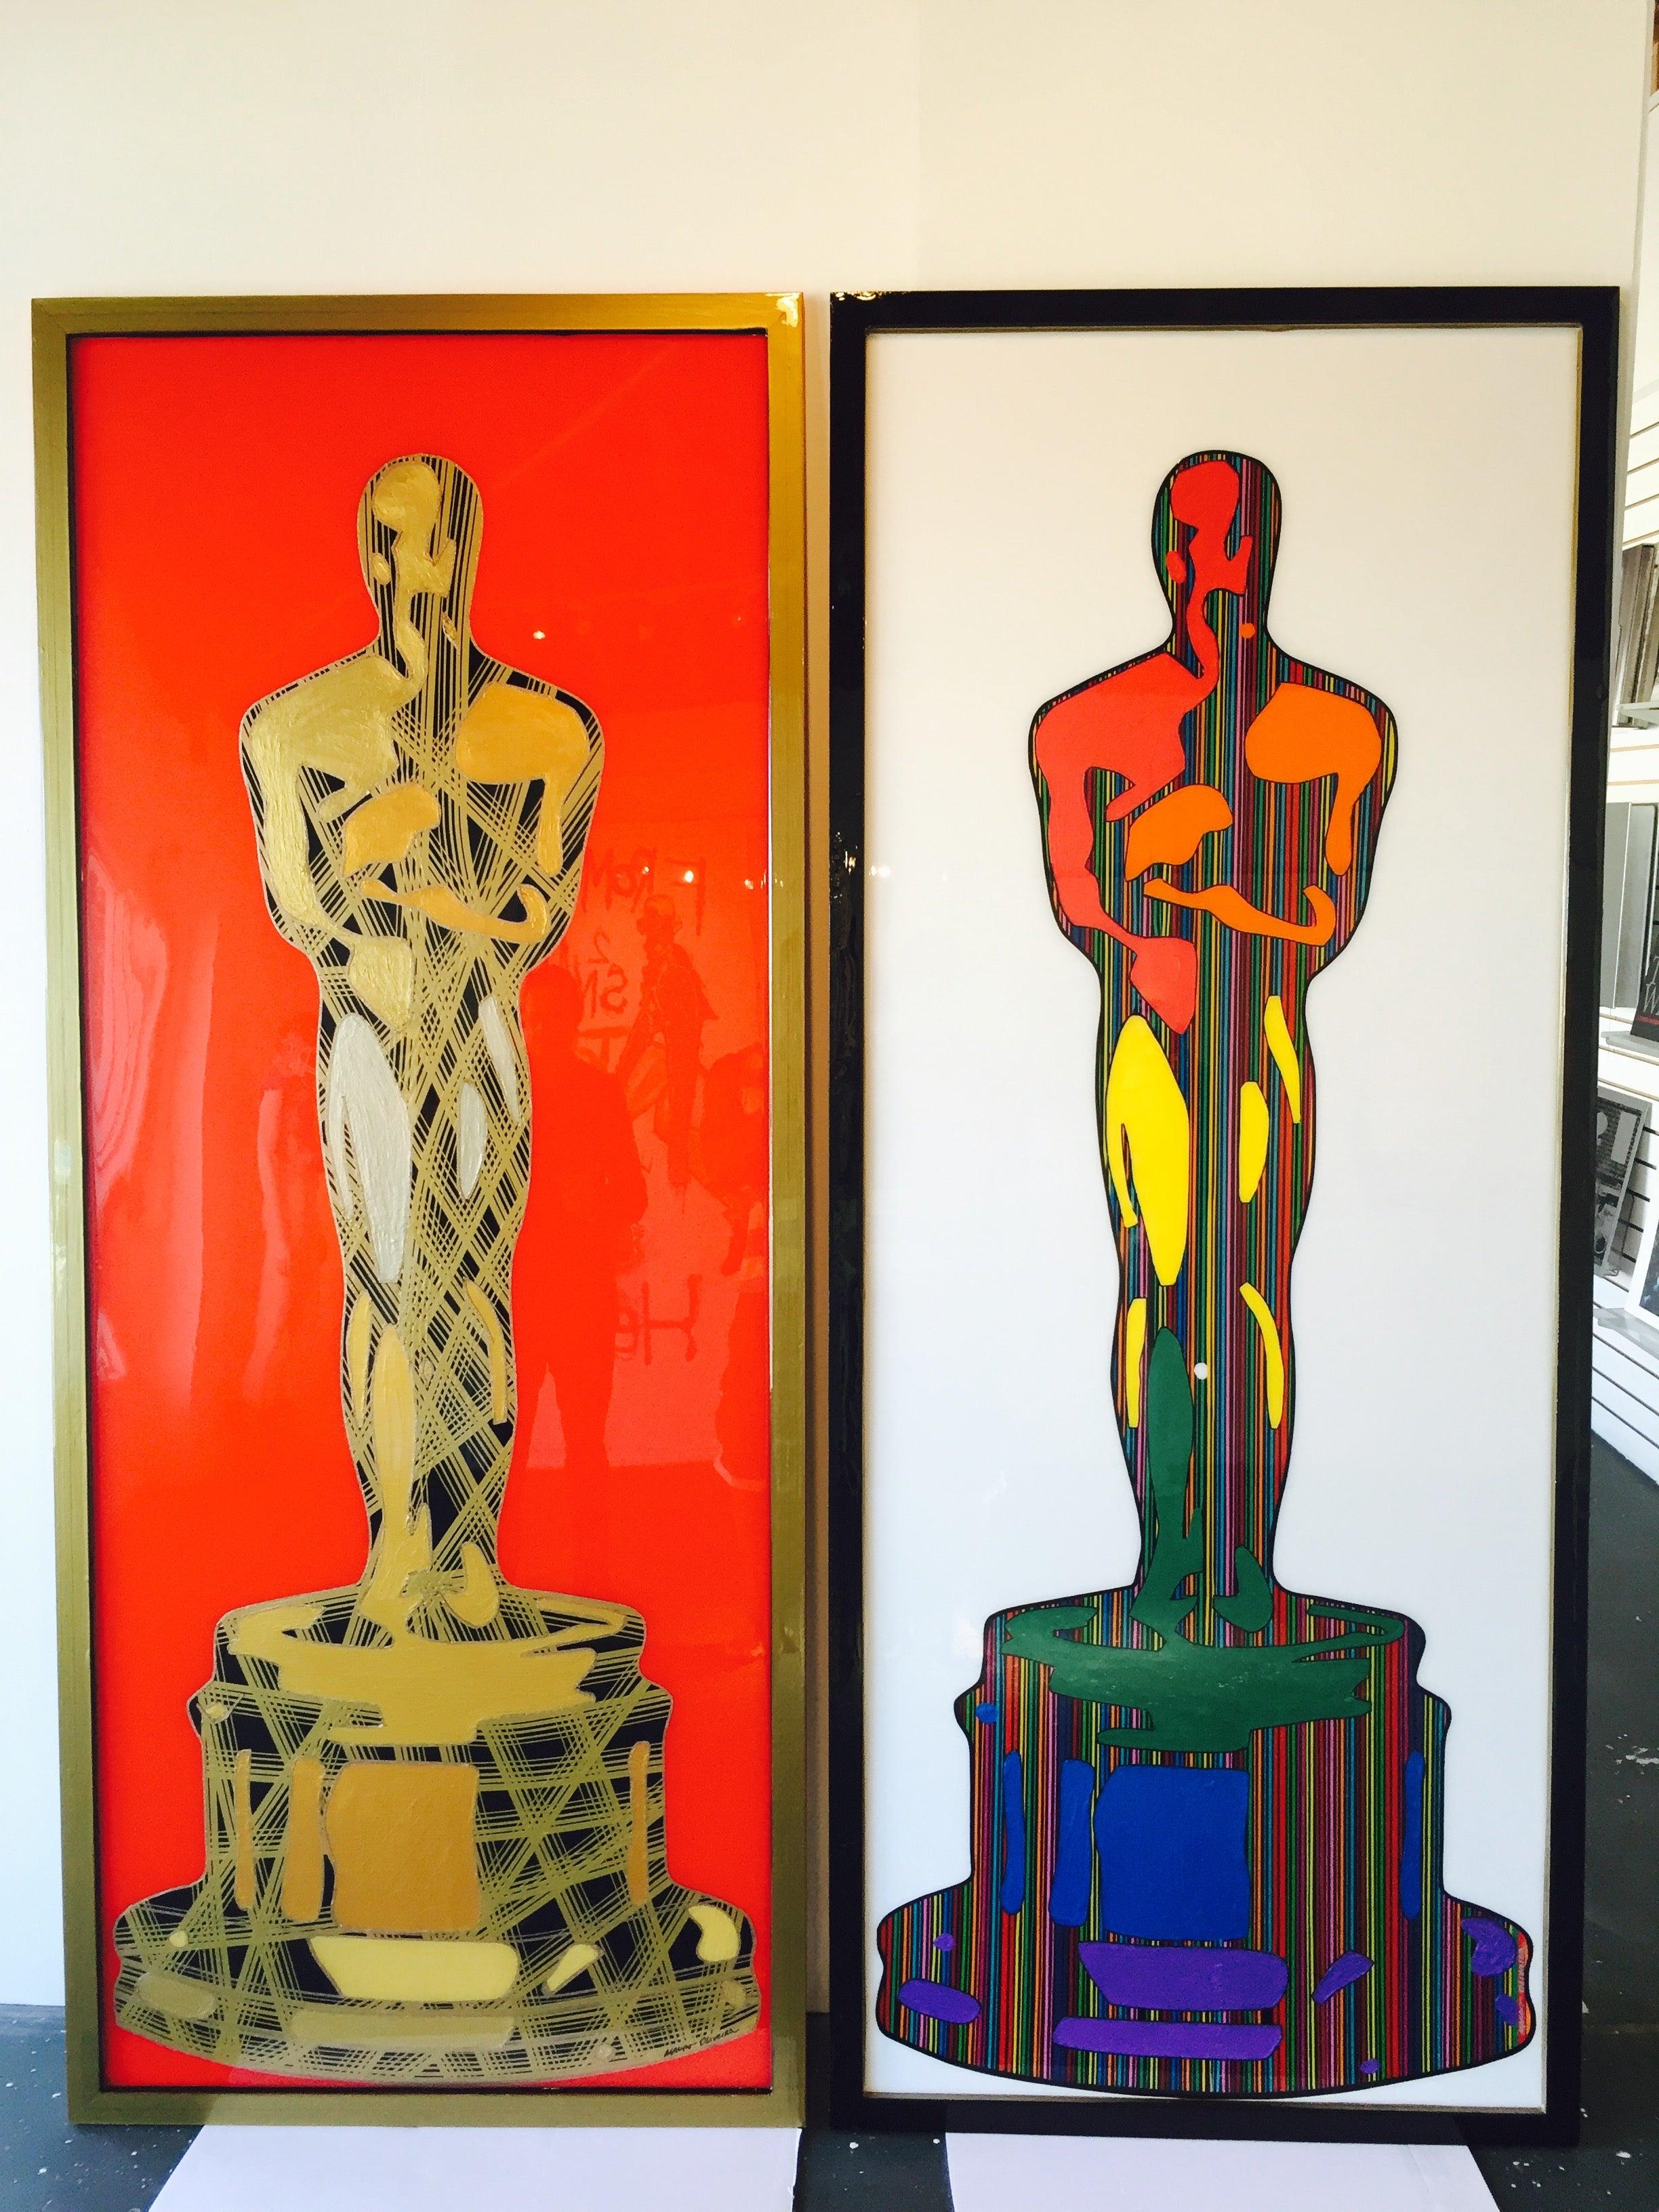                **ANNUAL SUPER SALE UNTIL MAY 15TH ONLY**
*This Price Won't Be Repeated Again This Year - Take Advantage Of It* 

Celebrating the Academy with this Limited Oscar Art Series by Mauro Oliveira. This is one of two RAINBOW